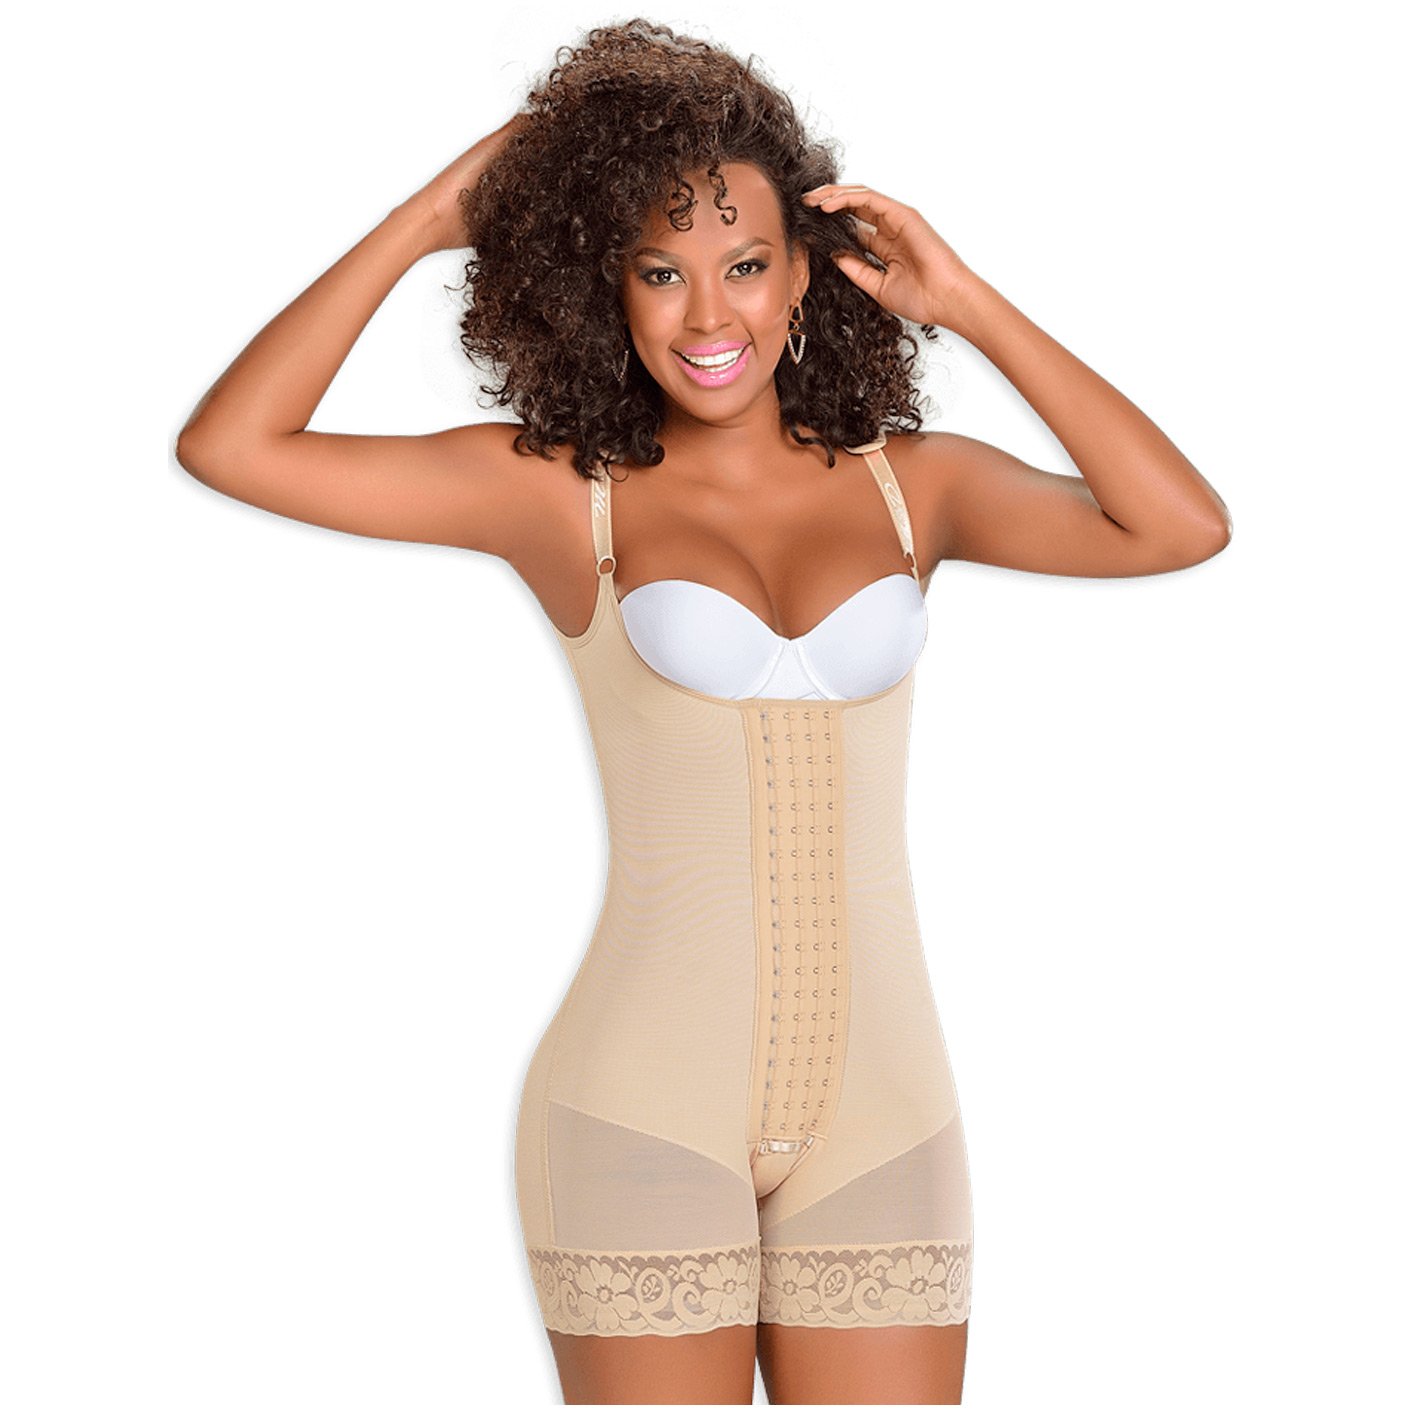 M&D Shapewear: 0083 - Mid Thigh Body Shaping Compression Garment - Showmee  Store